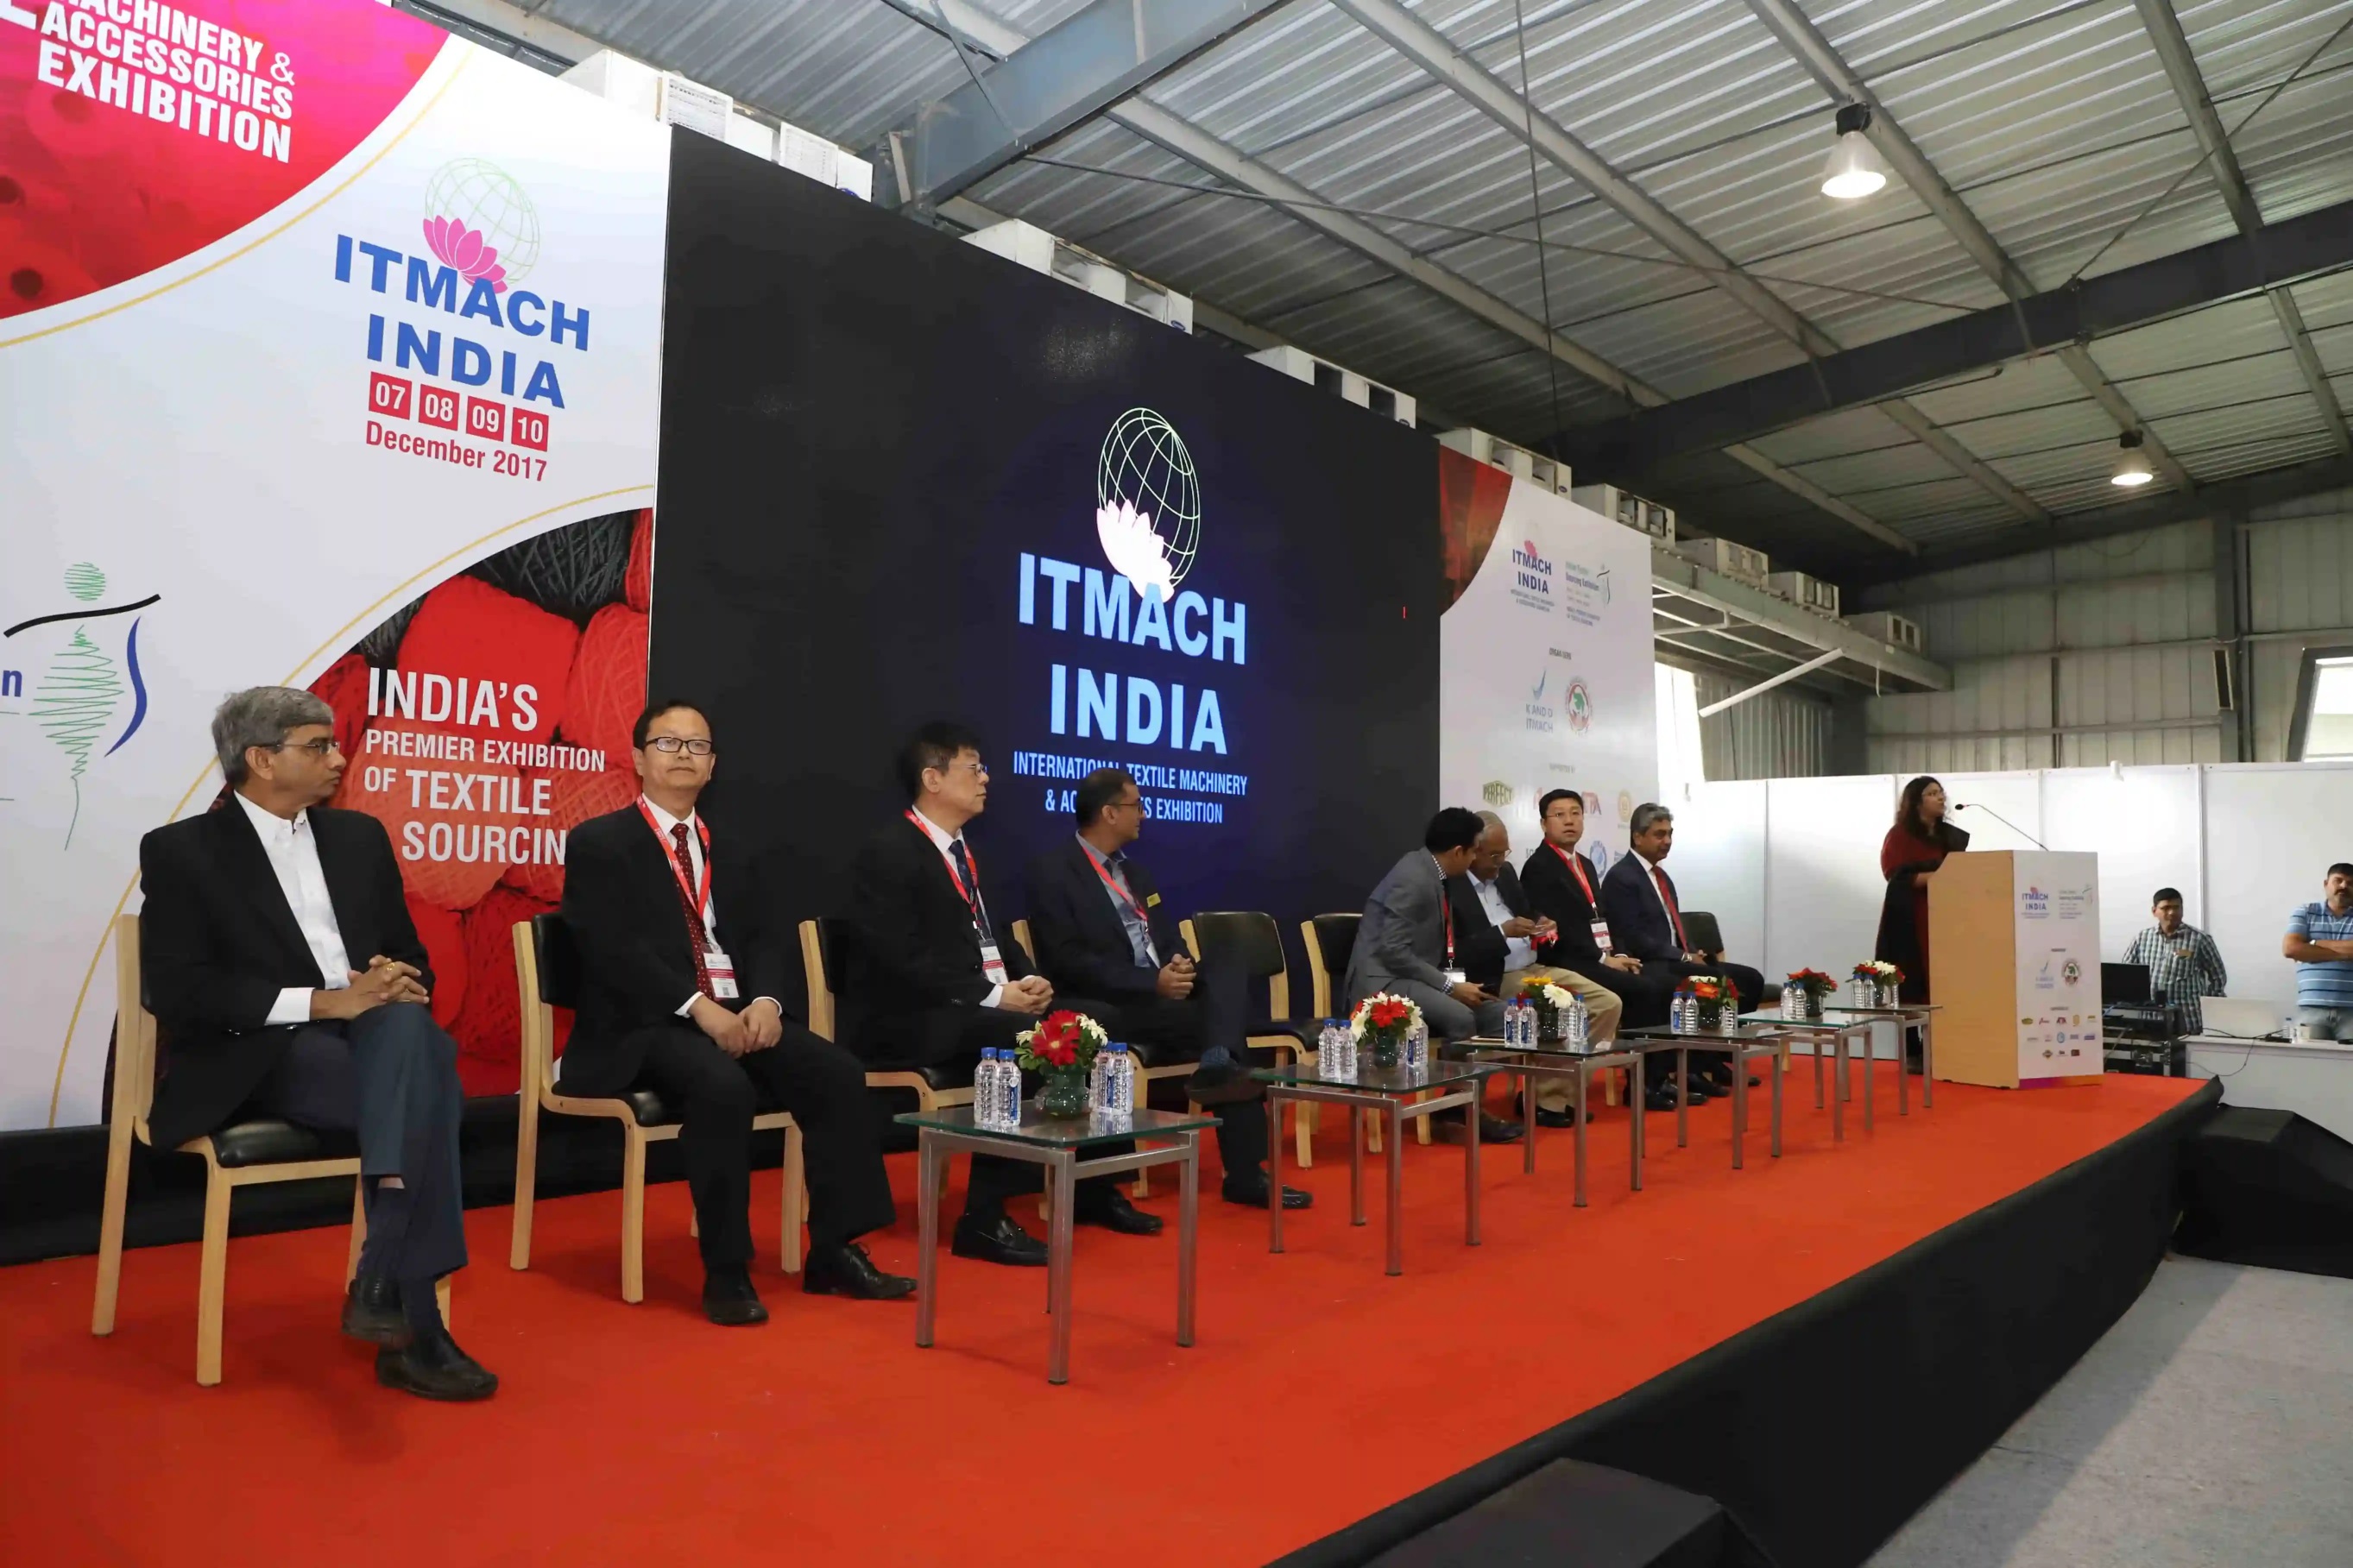 What Makes ITMACH India a Perfect Place for Entrepreneurs